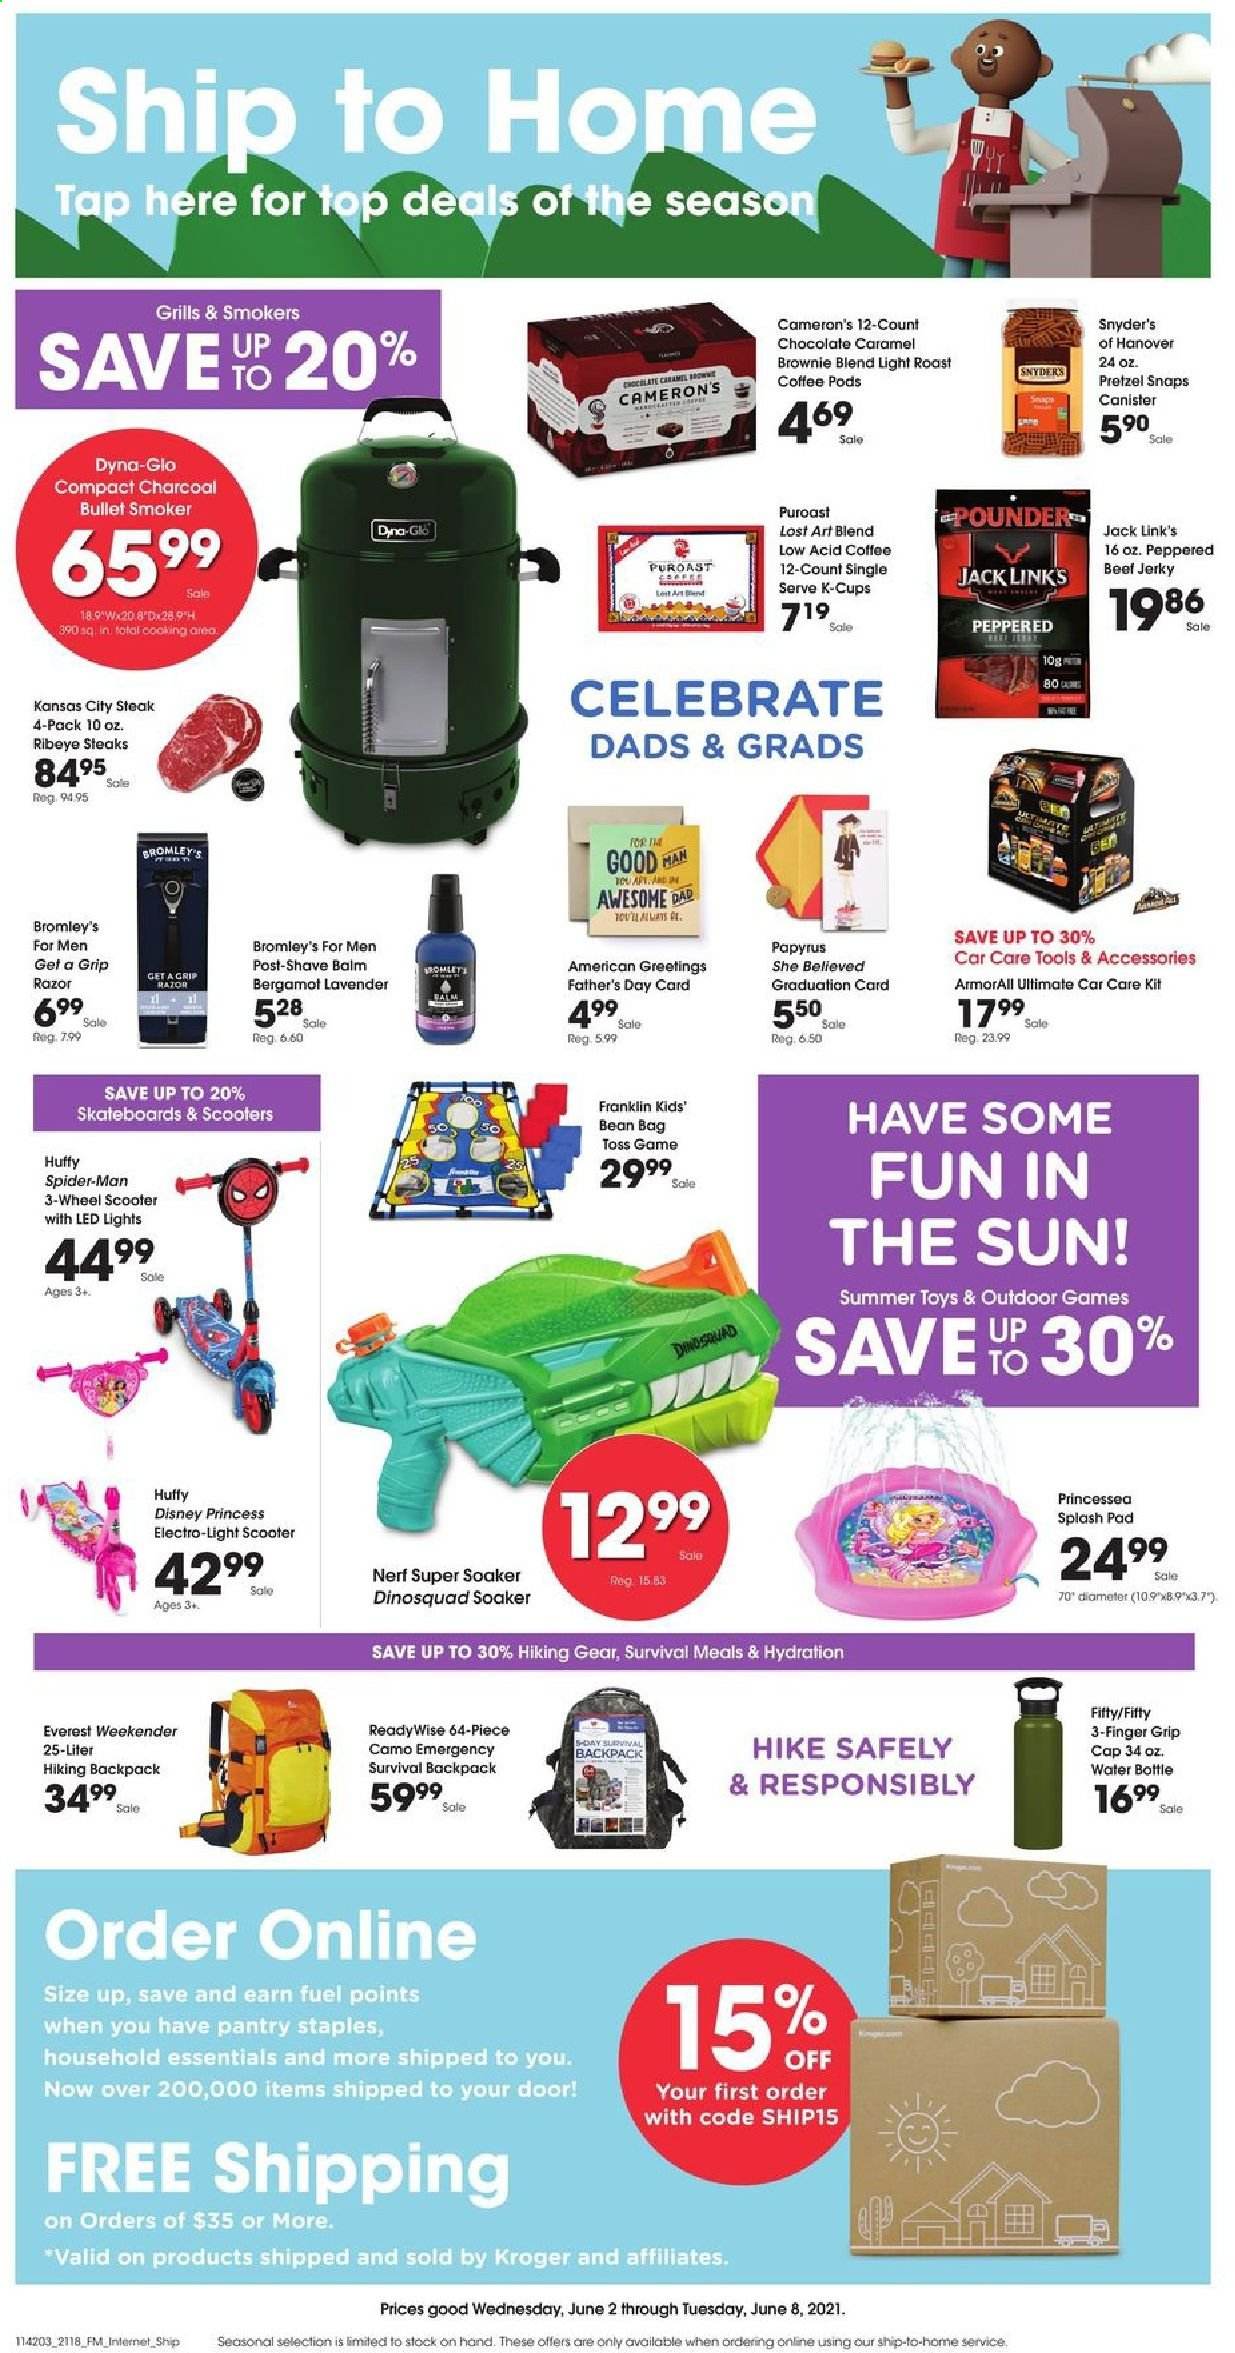 thumbnail - Ralphs Flyer - 06/02/2021 - 06/08/2021 - Sales products - pretzels, brownies, beef jerky, jerky, chocolate, Jack Link's, caramel, coffee pods, coffee capsules, K-Cups, sake, beef meat, steak, ribeye steak, Disney, razor, canister, drink bottle, Nerf, cap, backpack, Toss game, soaker, princess, LED light, smoker, charcoal. Page 1.